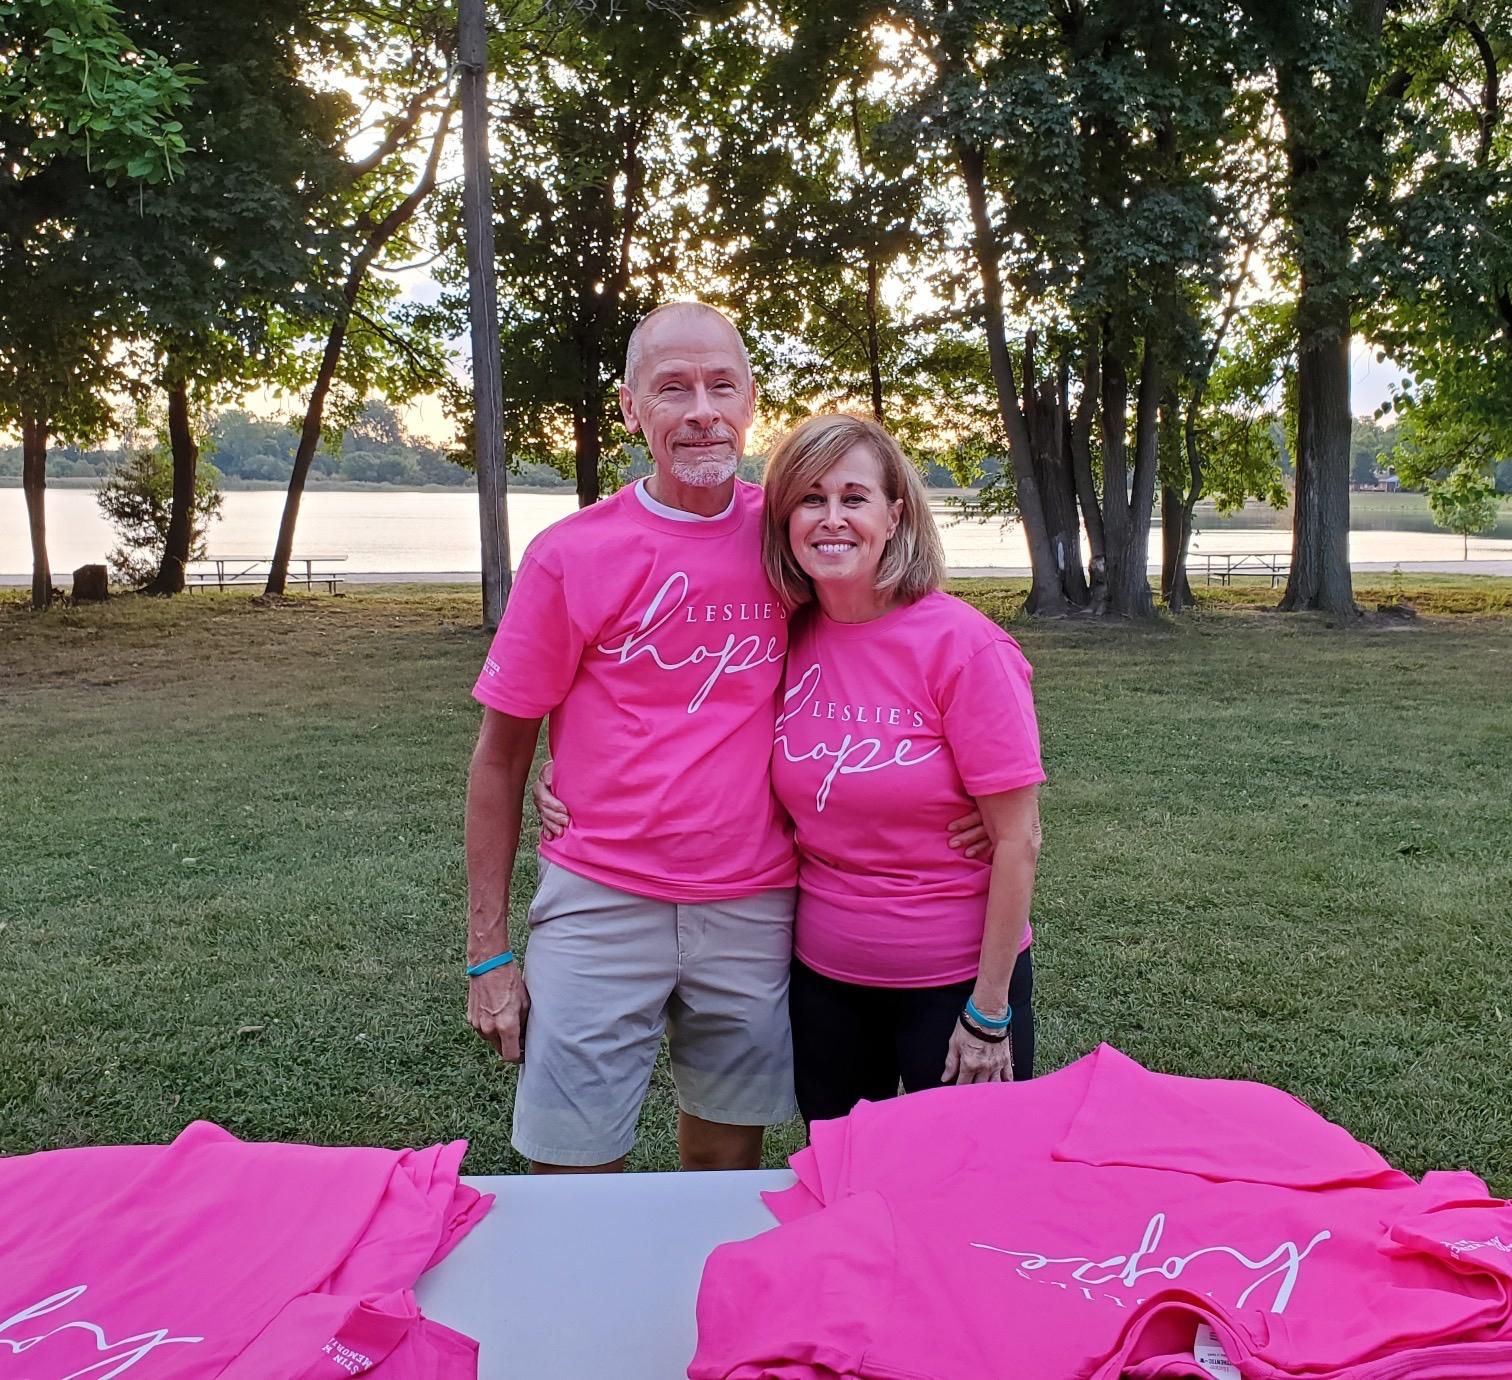 Keith and Leslie Weirich at the Inaugural Austin Weirich Memorial 5K in September 2021. They raised $11,000 for the scholarship fund at Austin\u2019s high school in Goshen, Indiana.